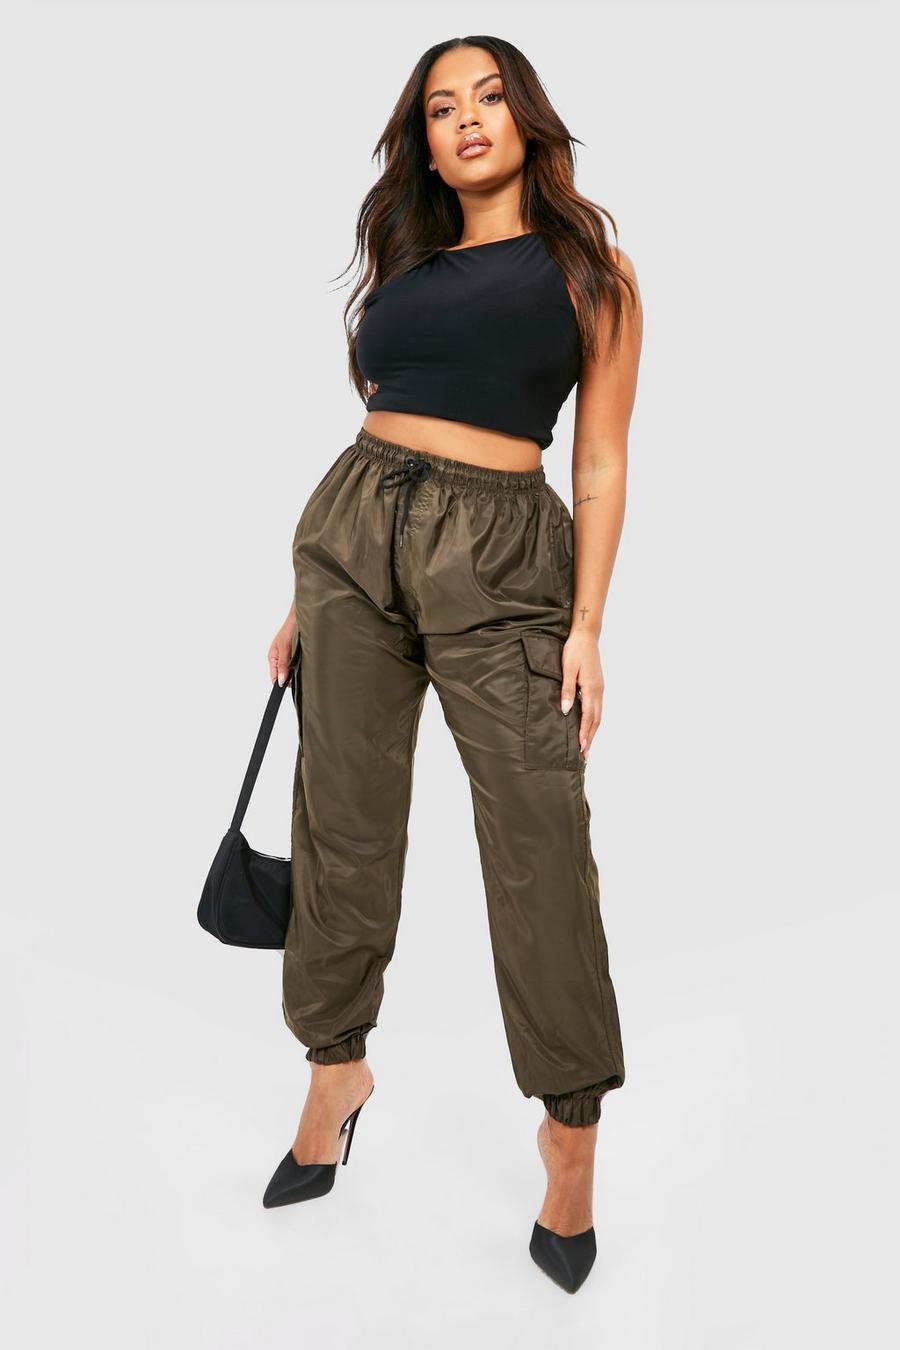 6 plus-size work pants that'll have you ready for the office in a